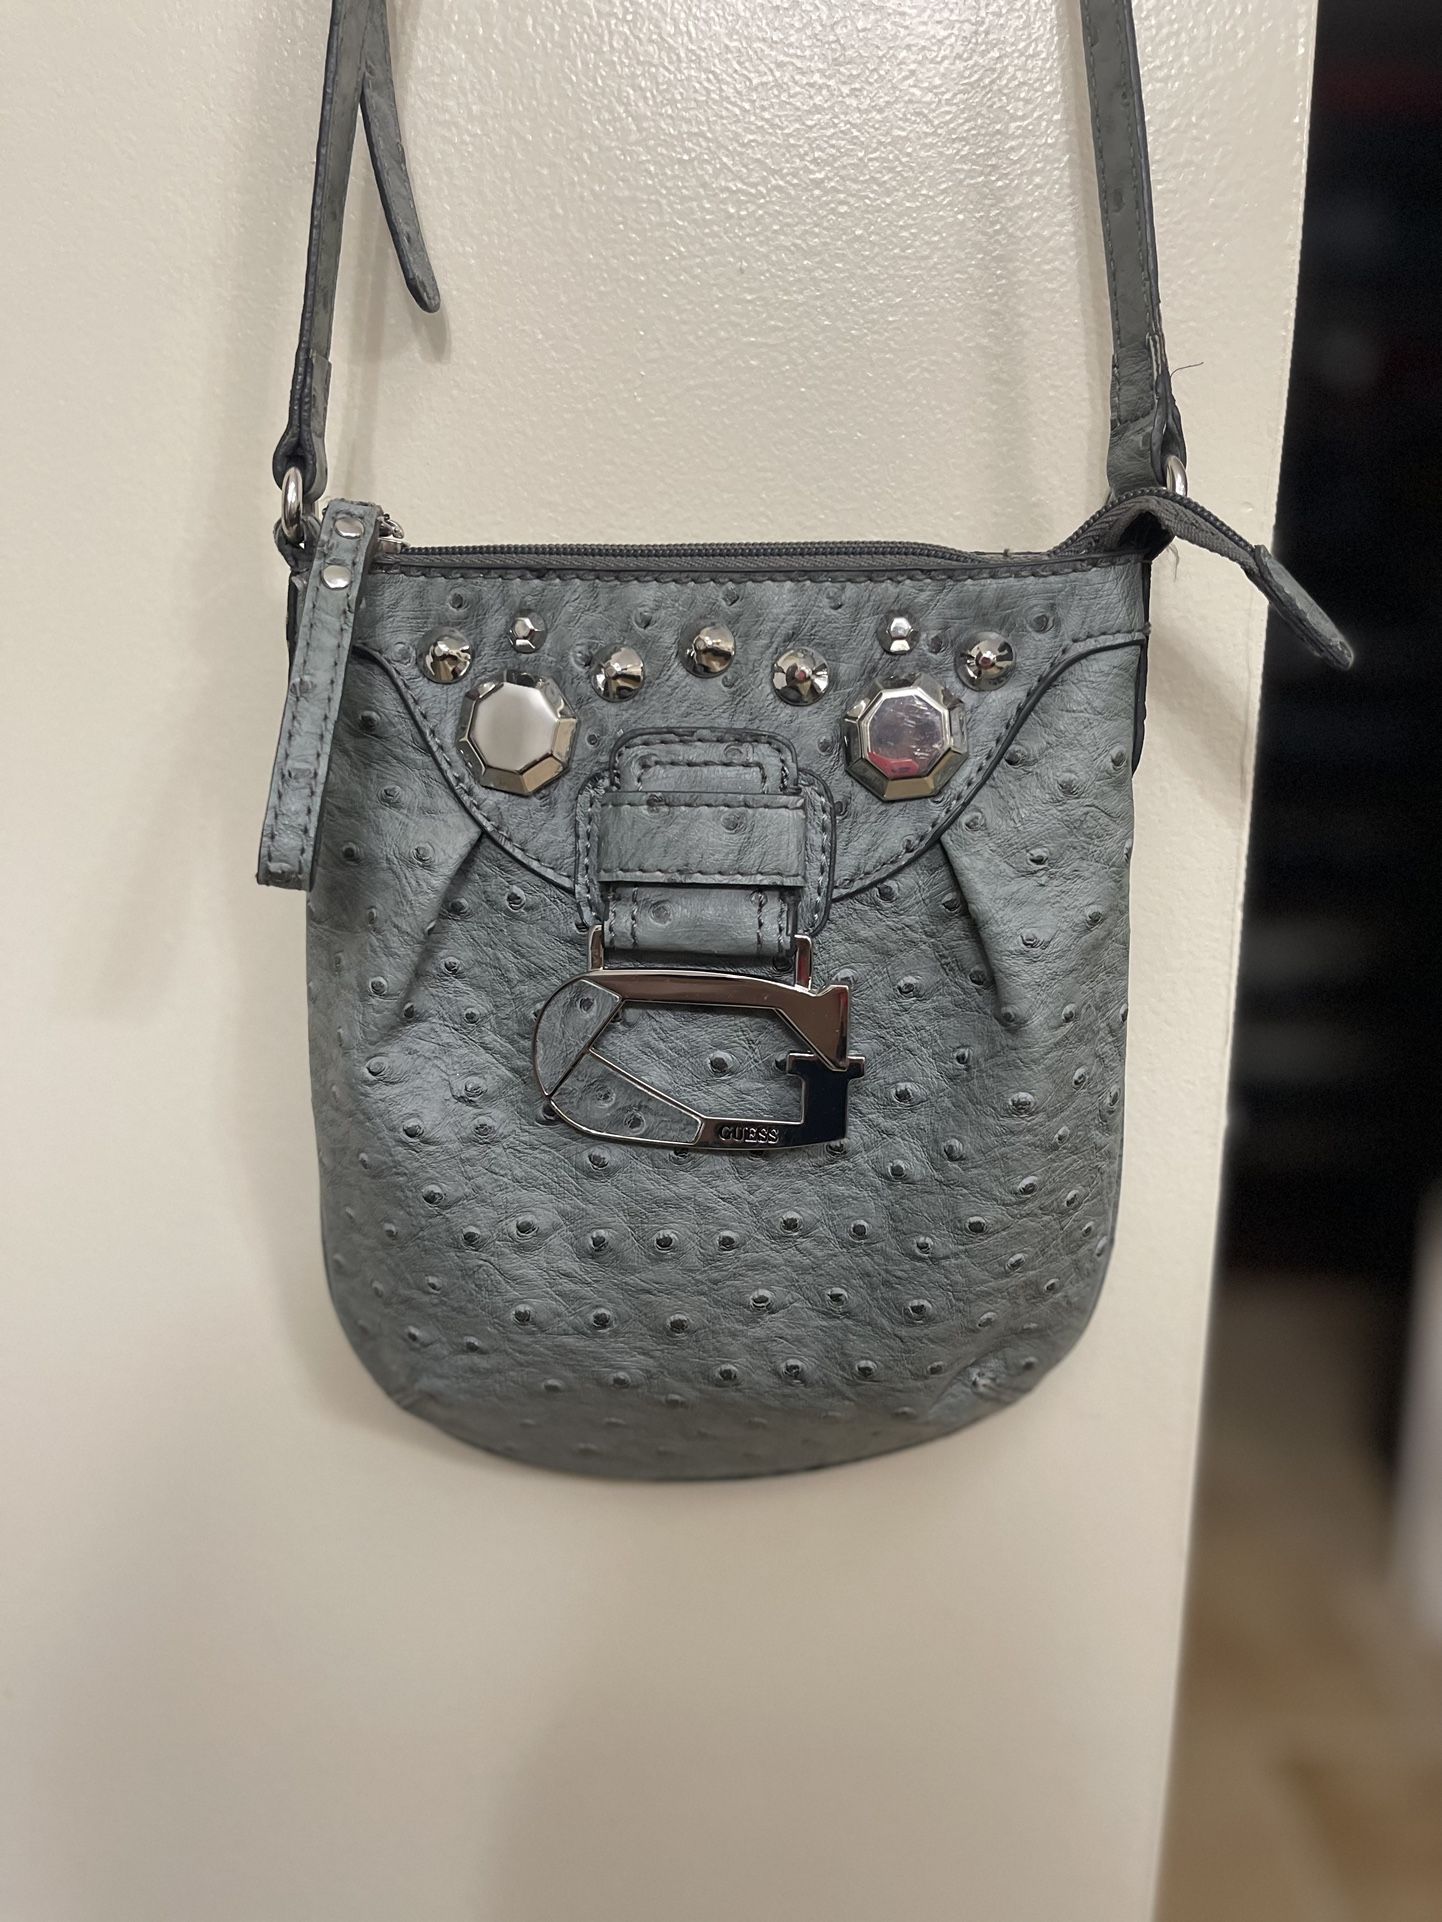 Guess Purse - Grey with silver - Adjustable strap.